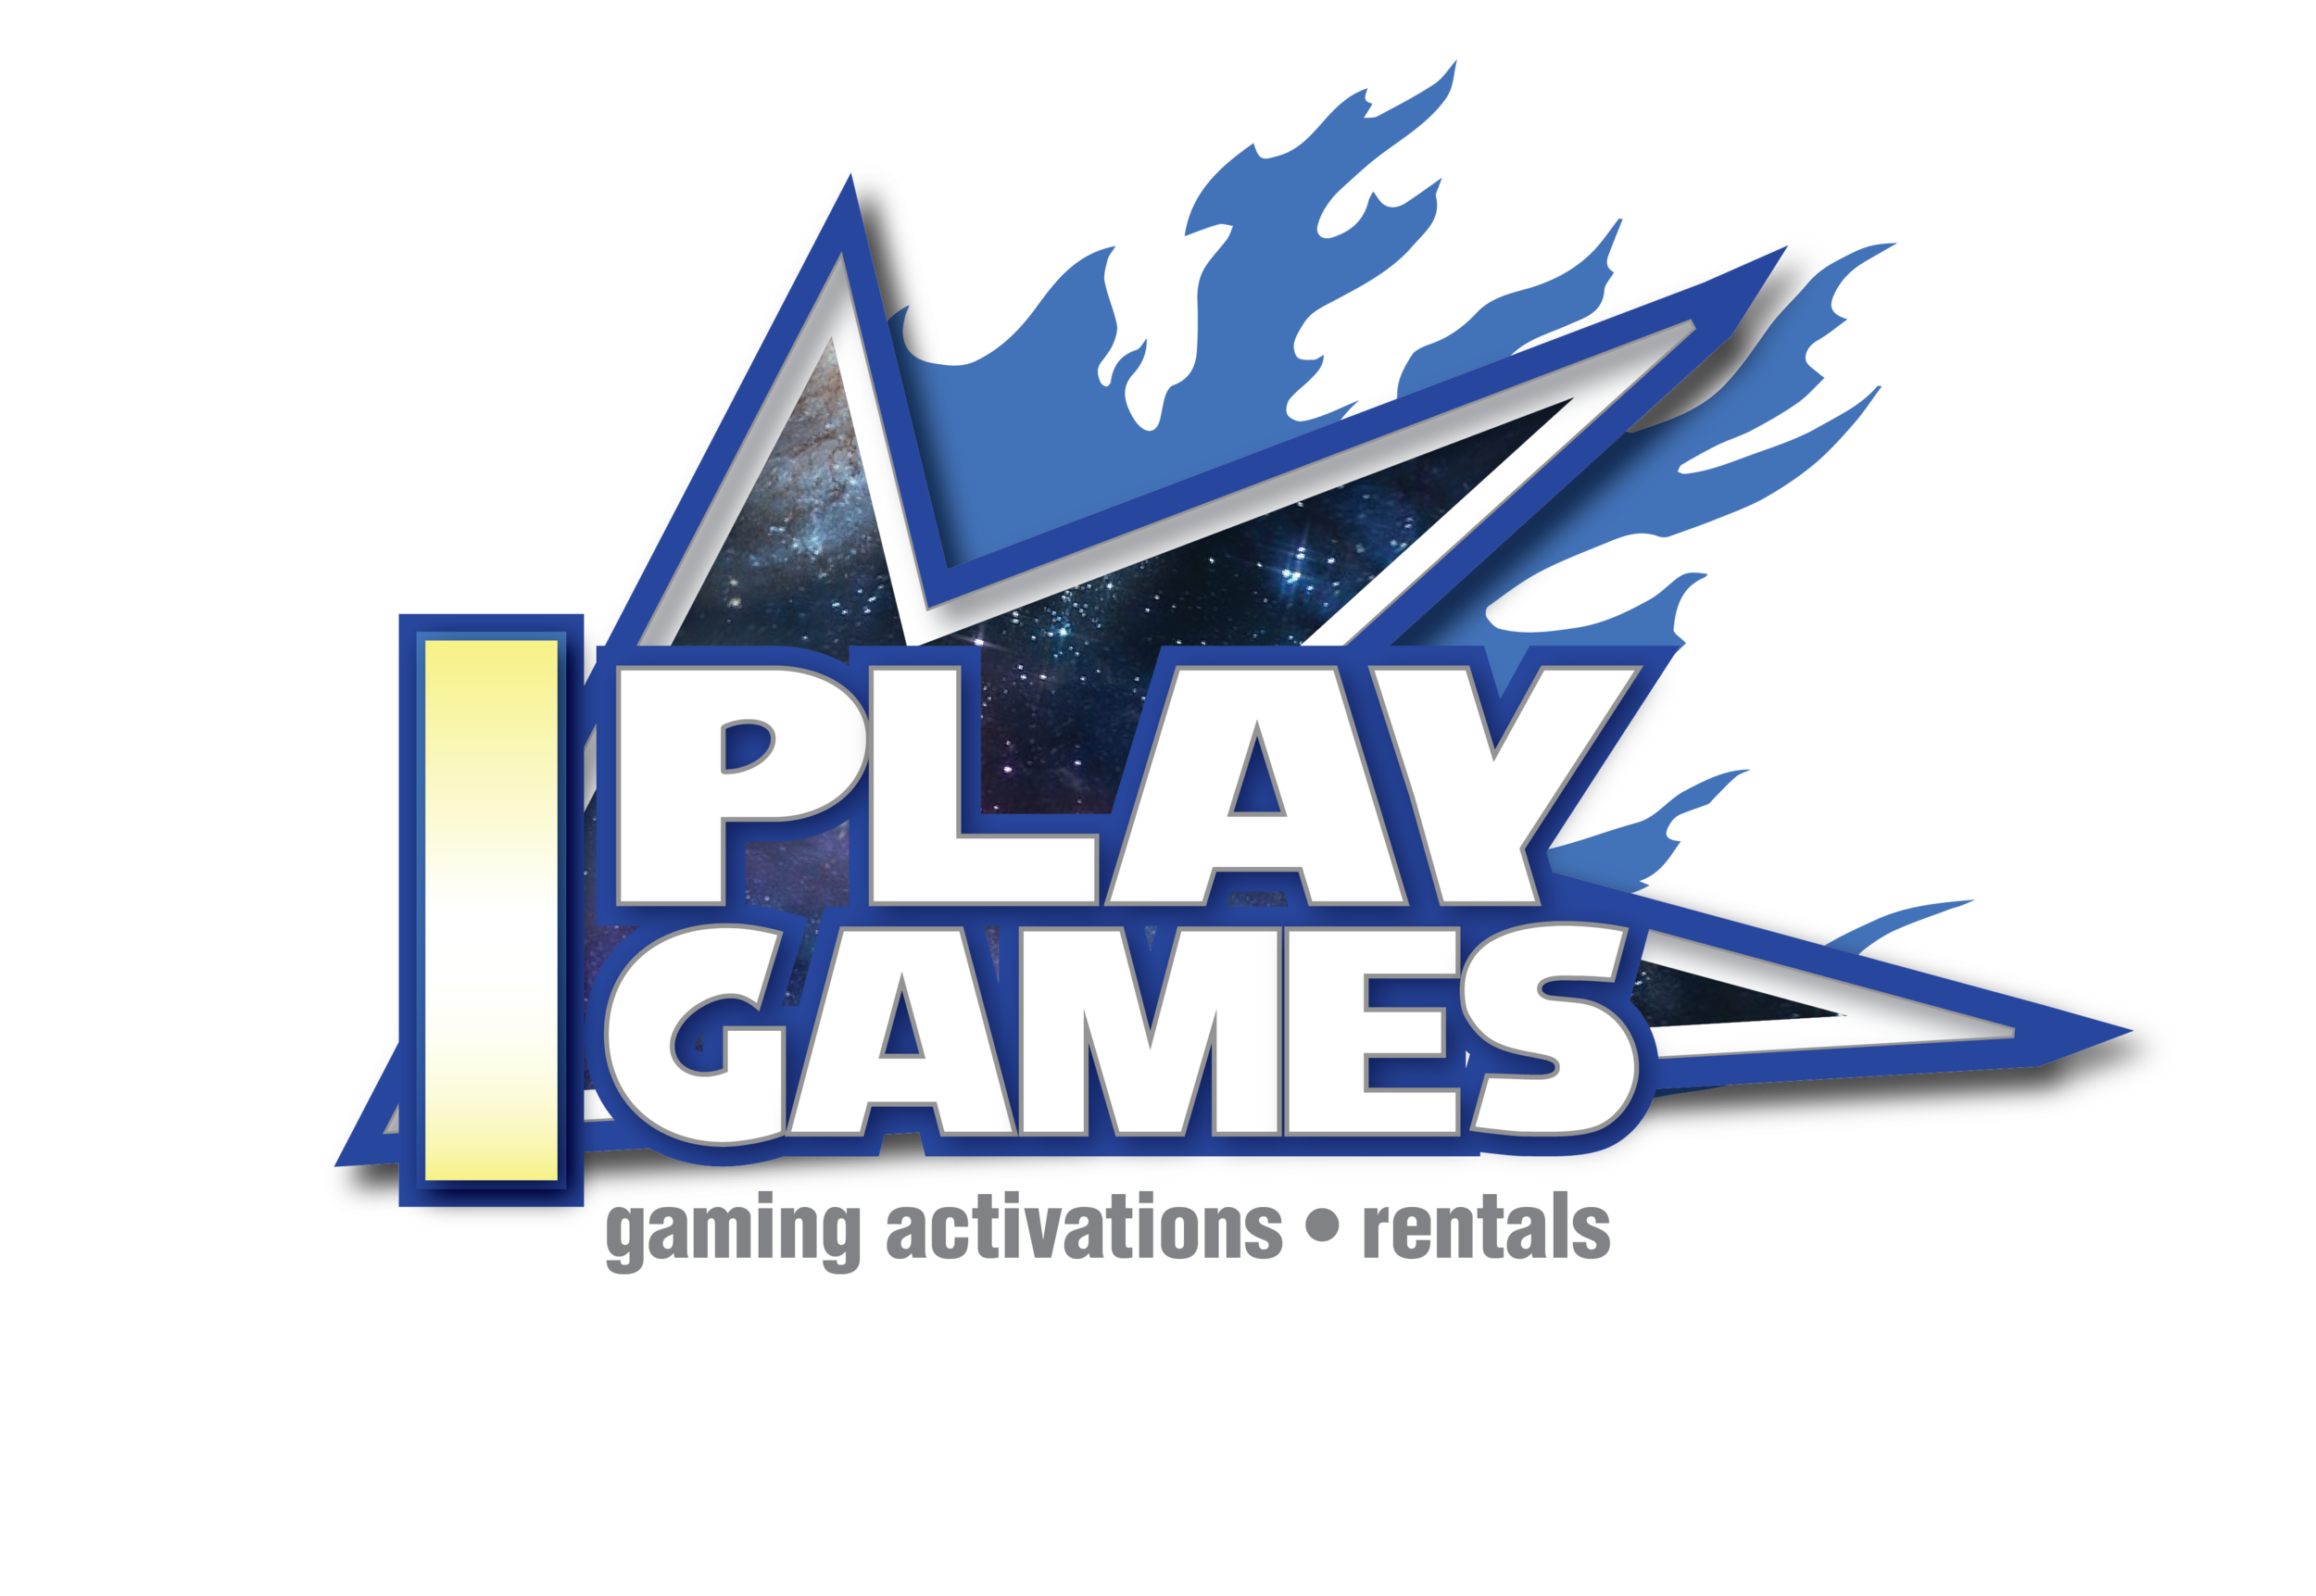 2019_I Play Games Brand (Blue Flame)-02.png